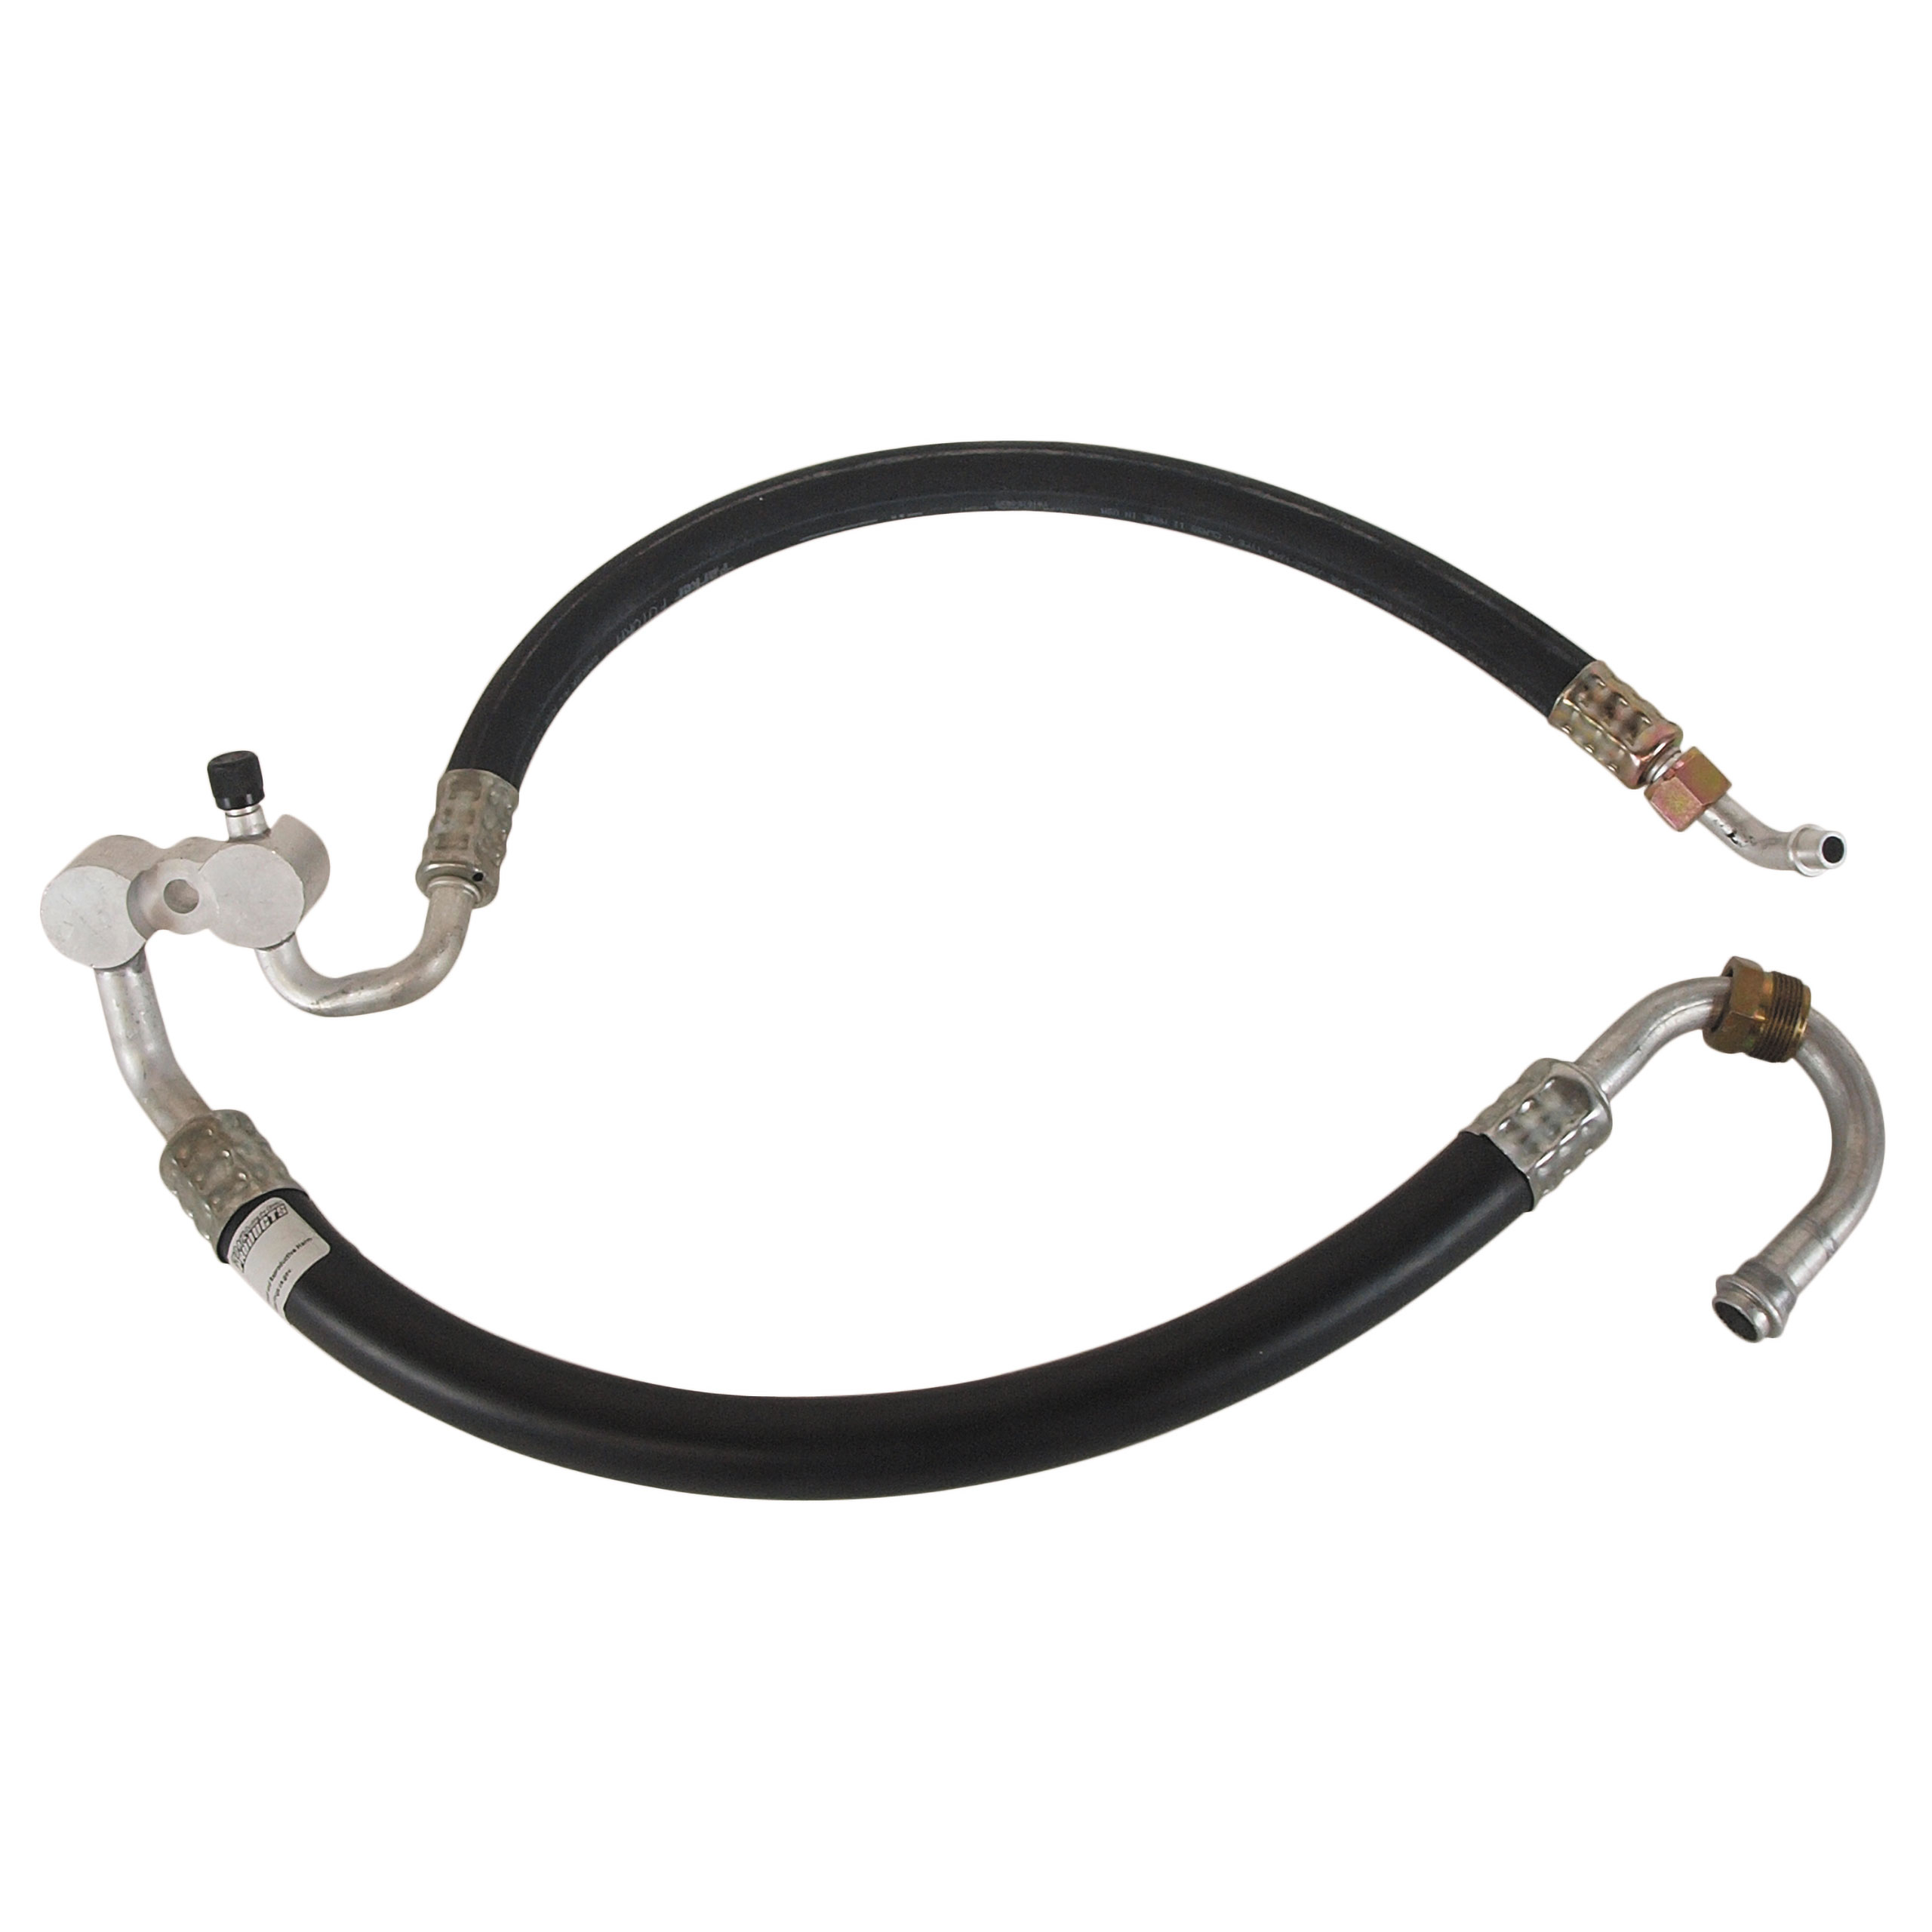 C3 1973 Chevrolet Corvette Air Conditioning Main Compressor Hose. Small Block W/AC - Old Air Products